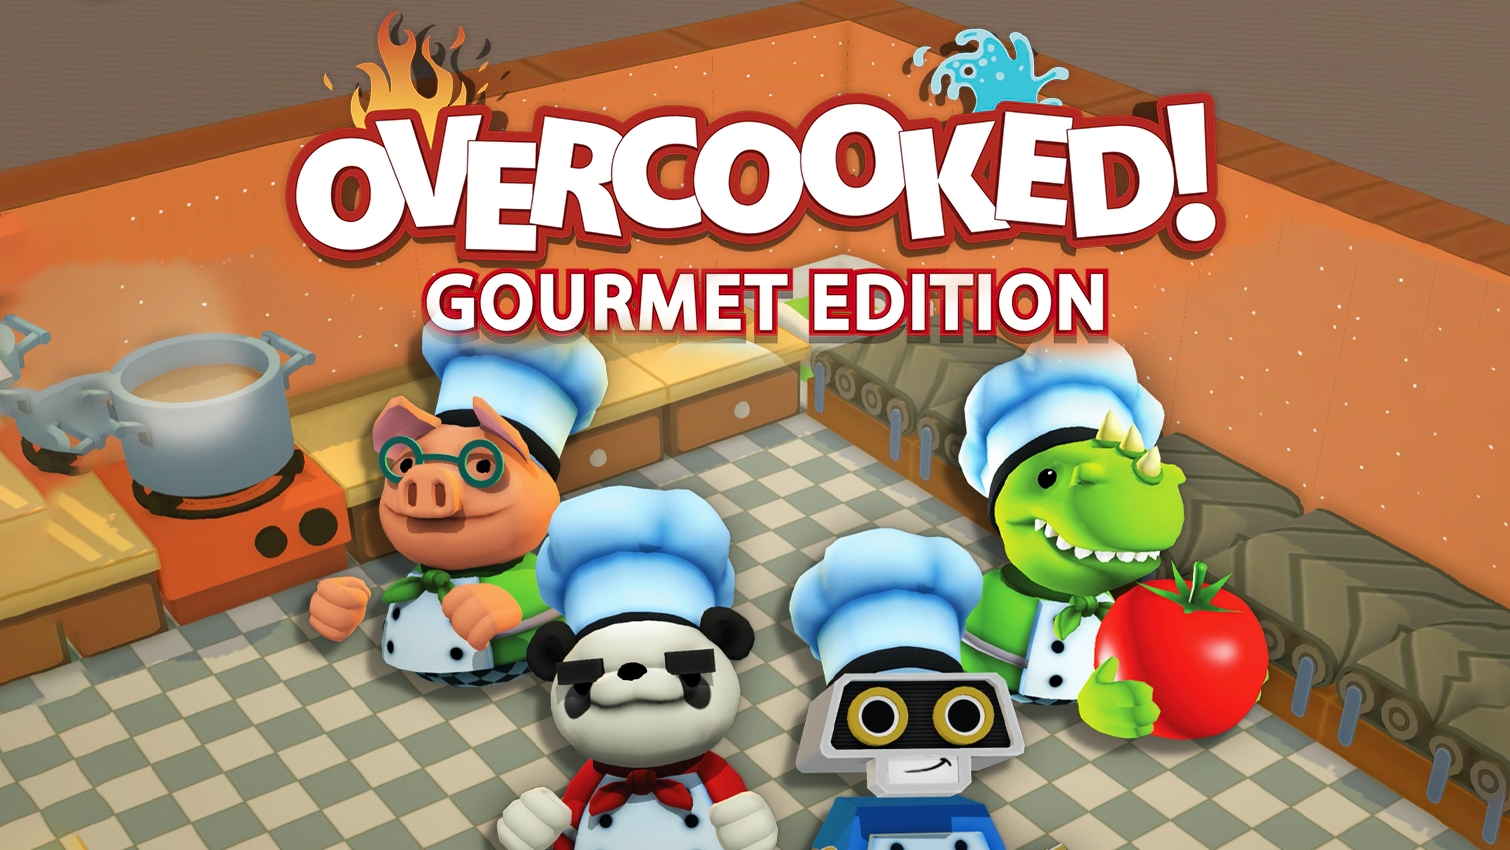 Is Overcooked 2 Cross Platform on Xbox, PS4 and PC?